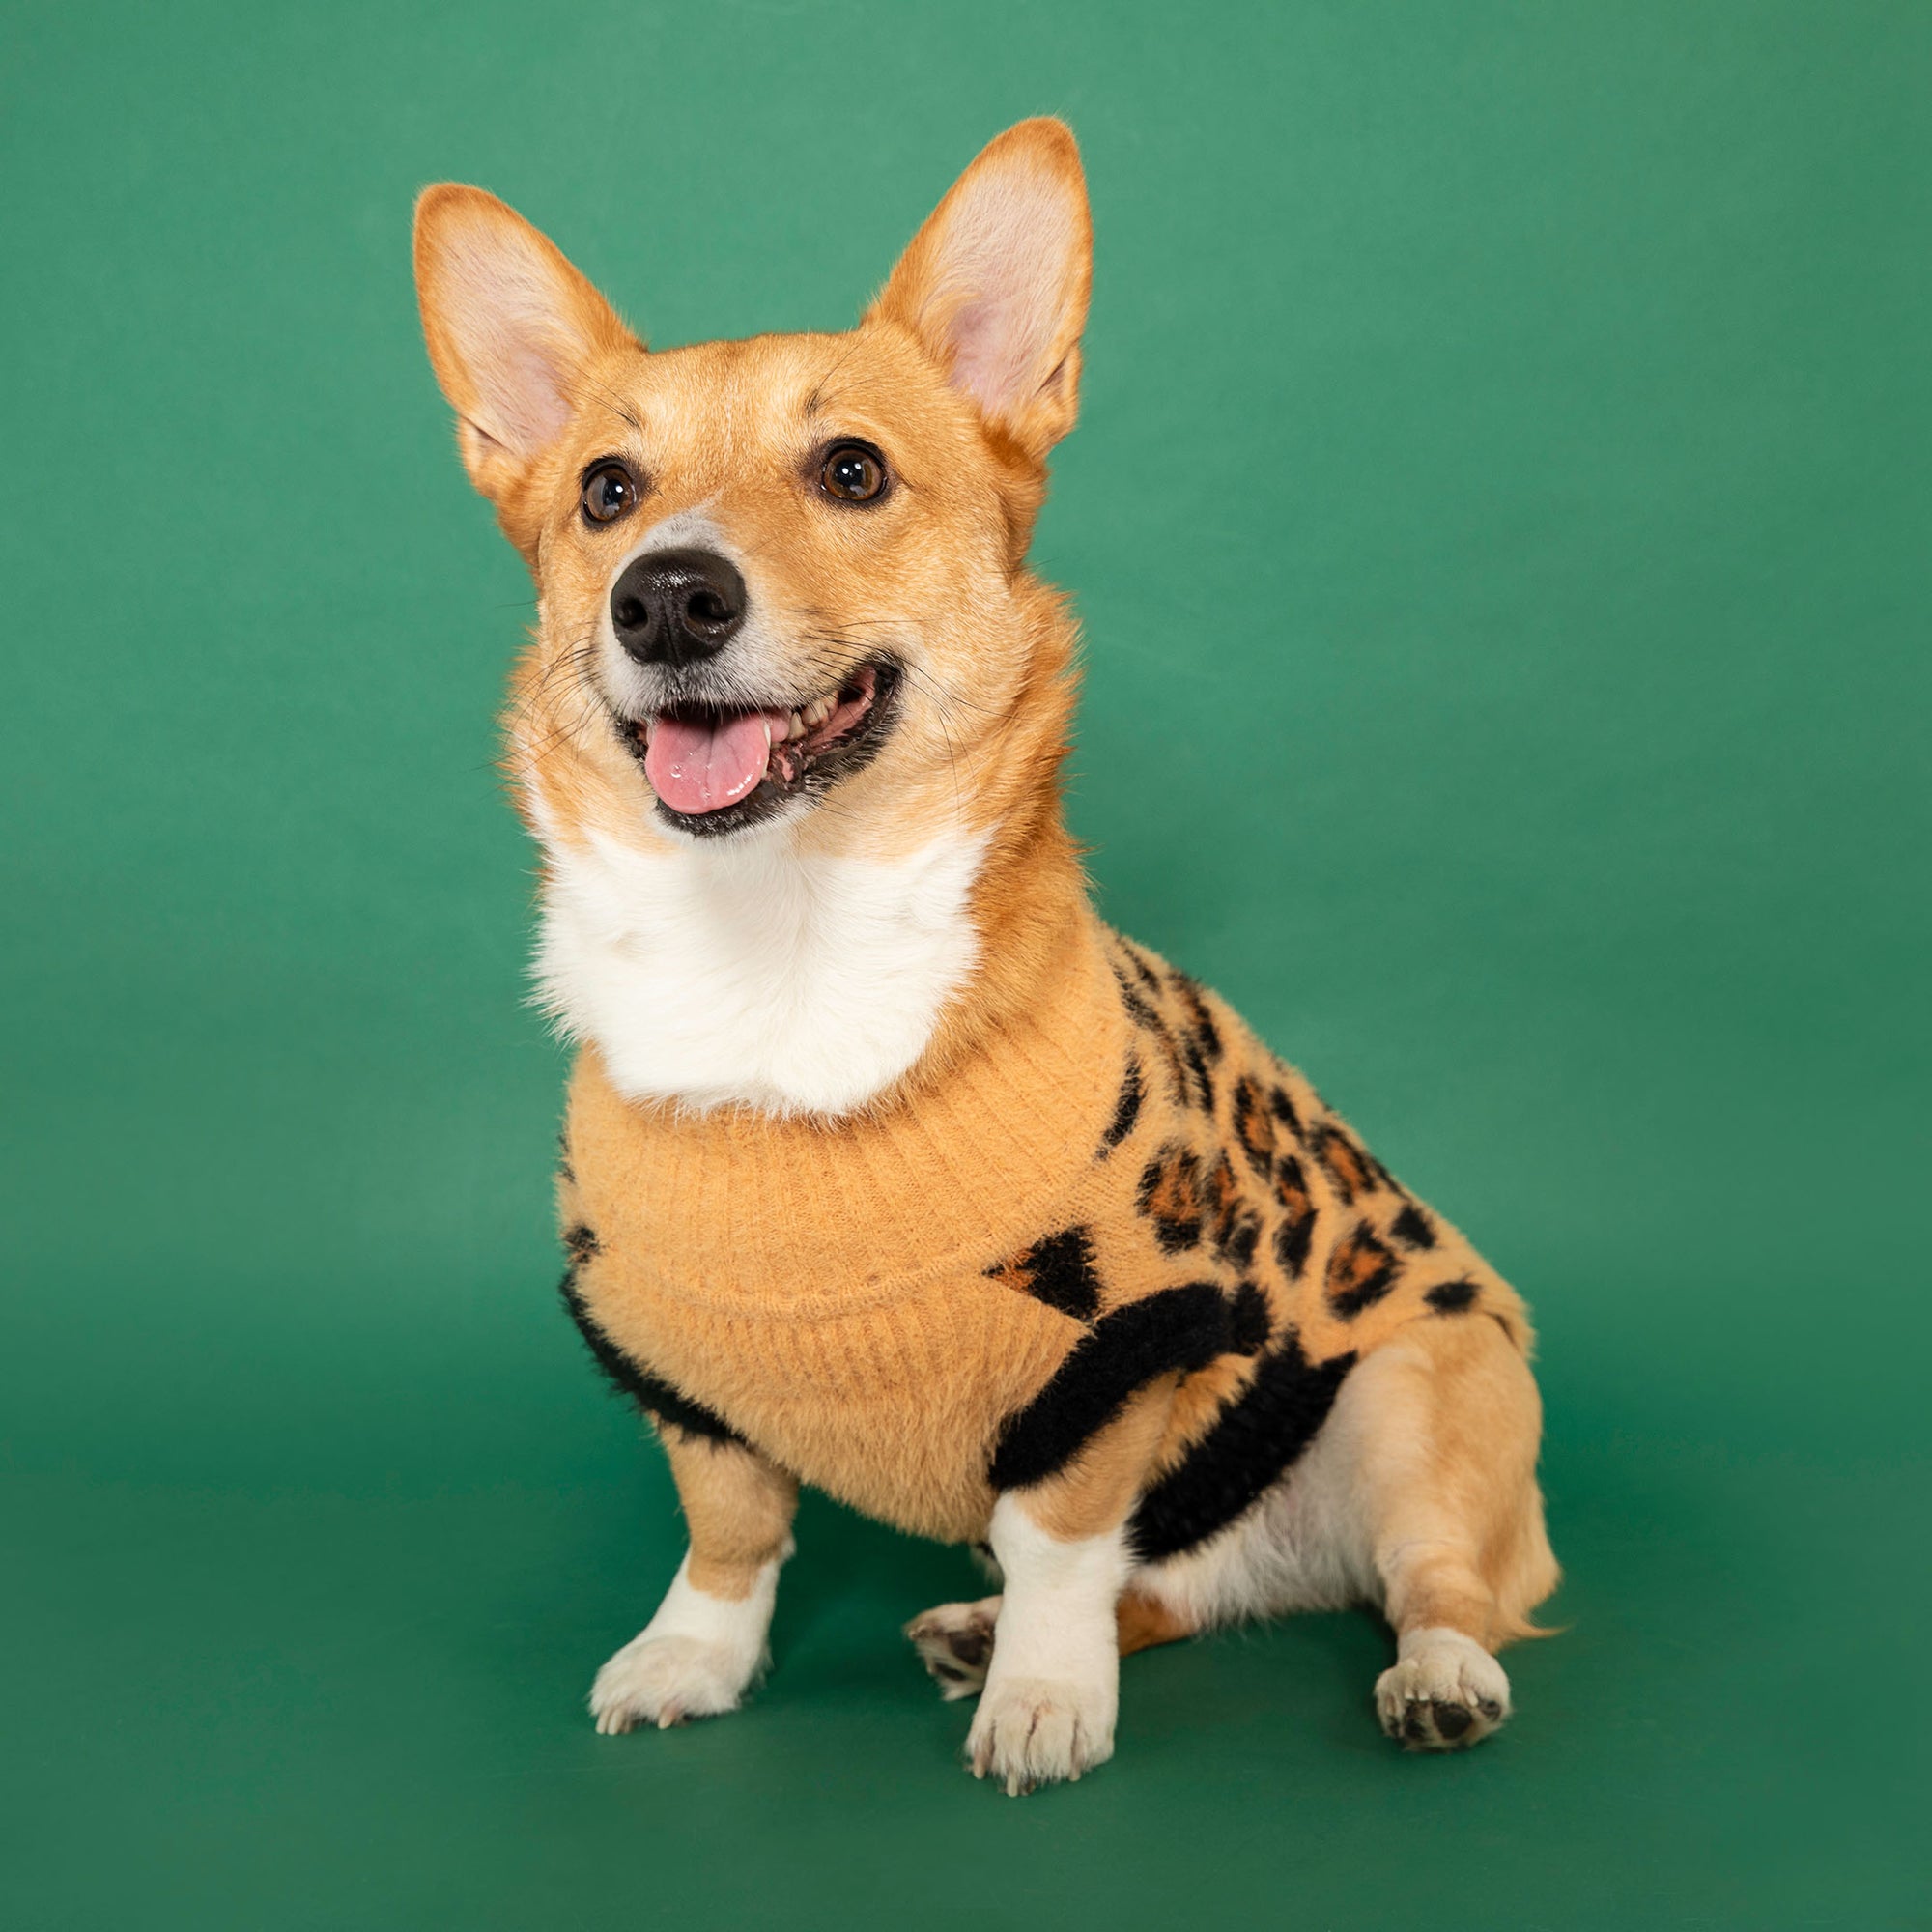 Happy Corgi with a beaming smile, wearing a snug tan sweater with black leopard spots, seated against a lush green backdrop.